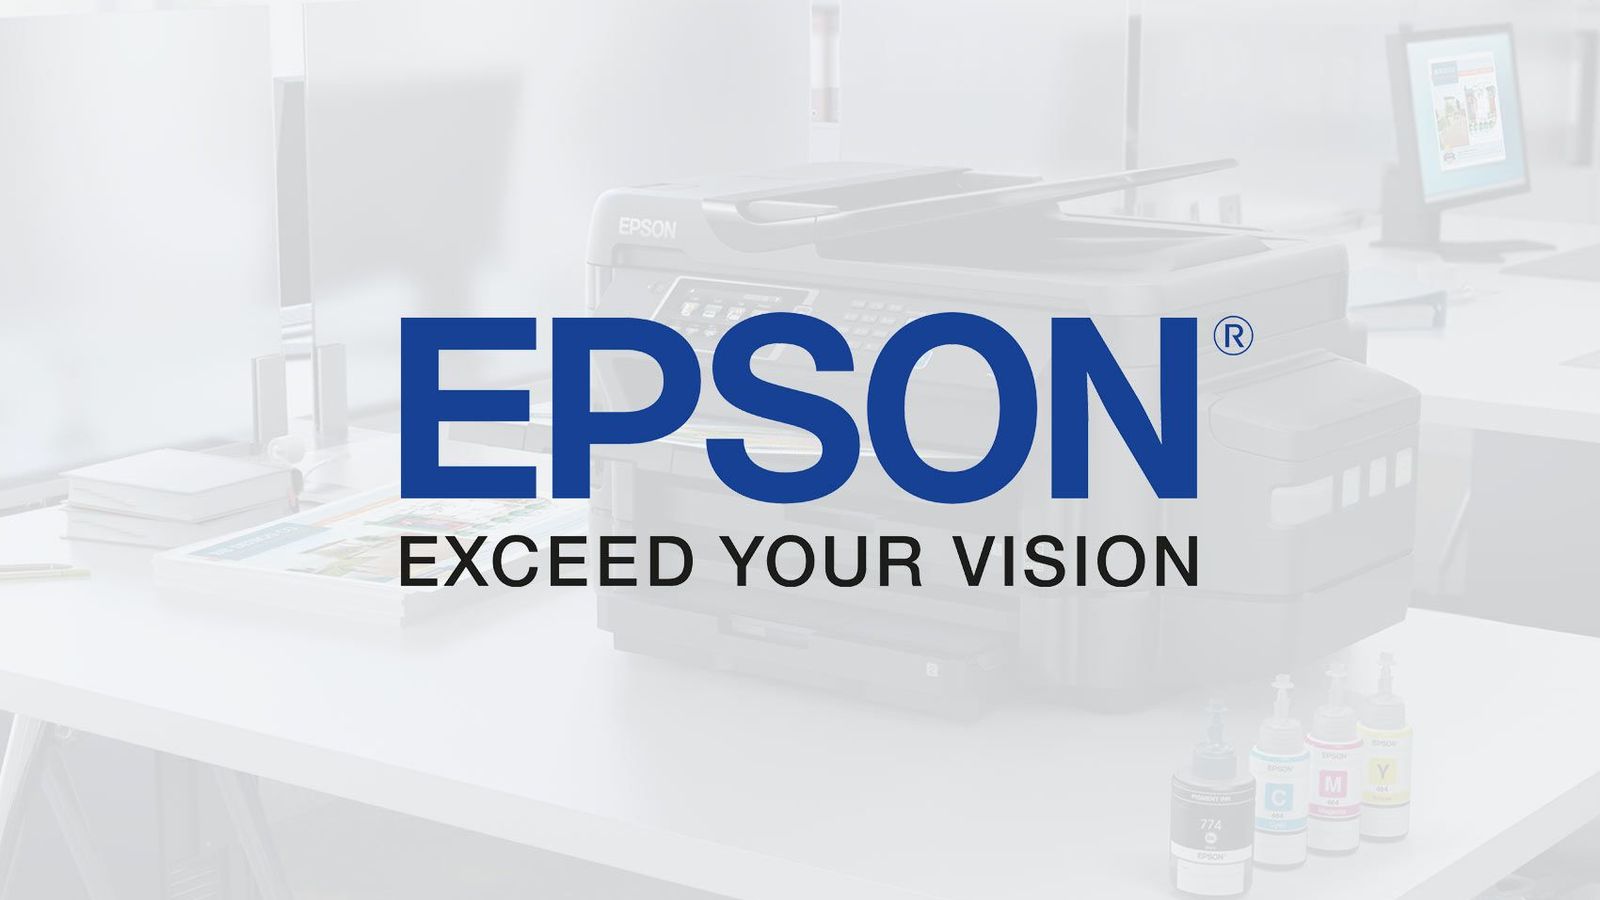 Epson delivers a consistent approach to recruitment processes with TalentLink